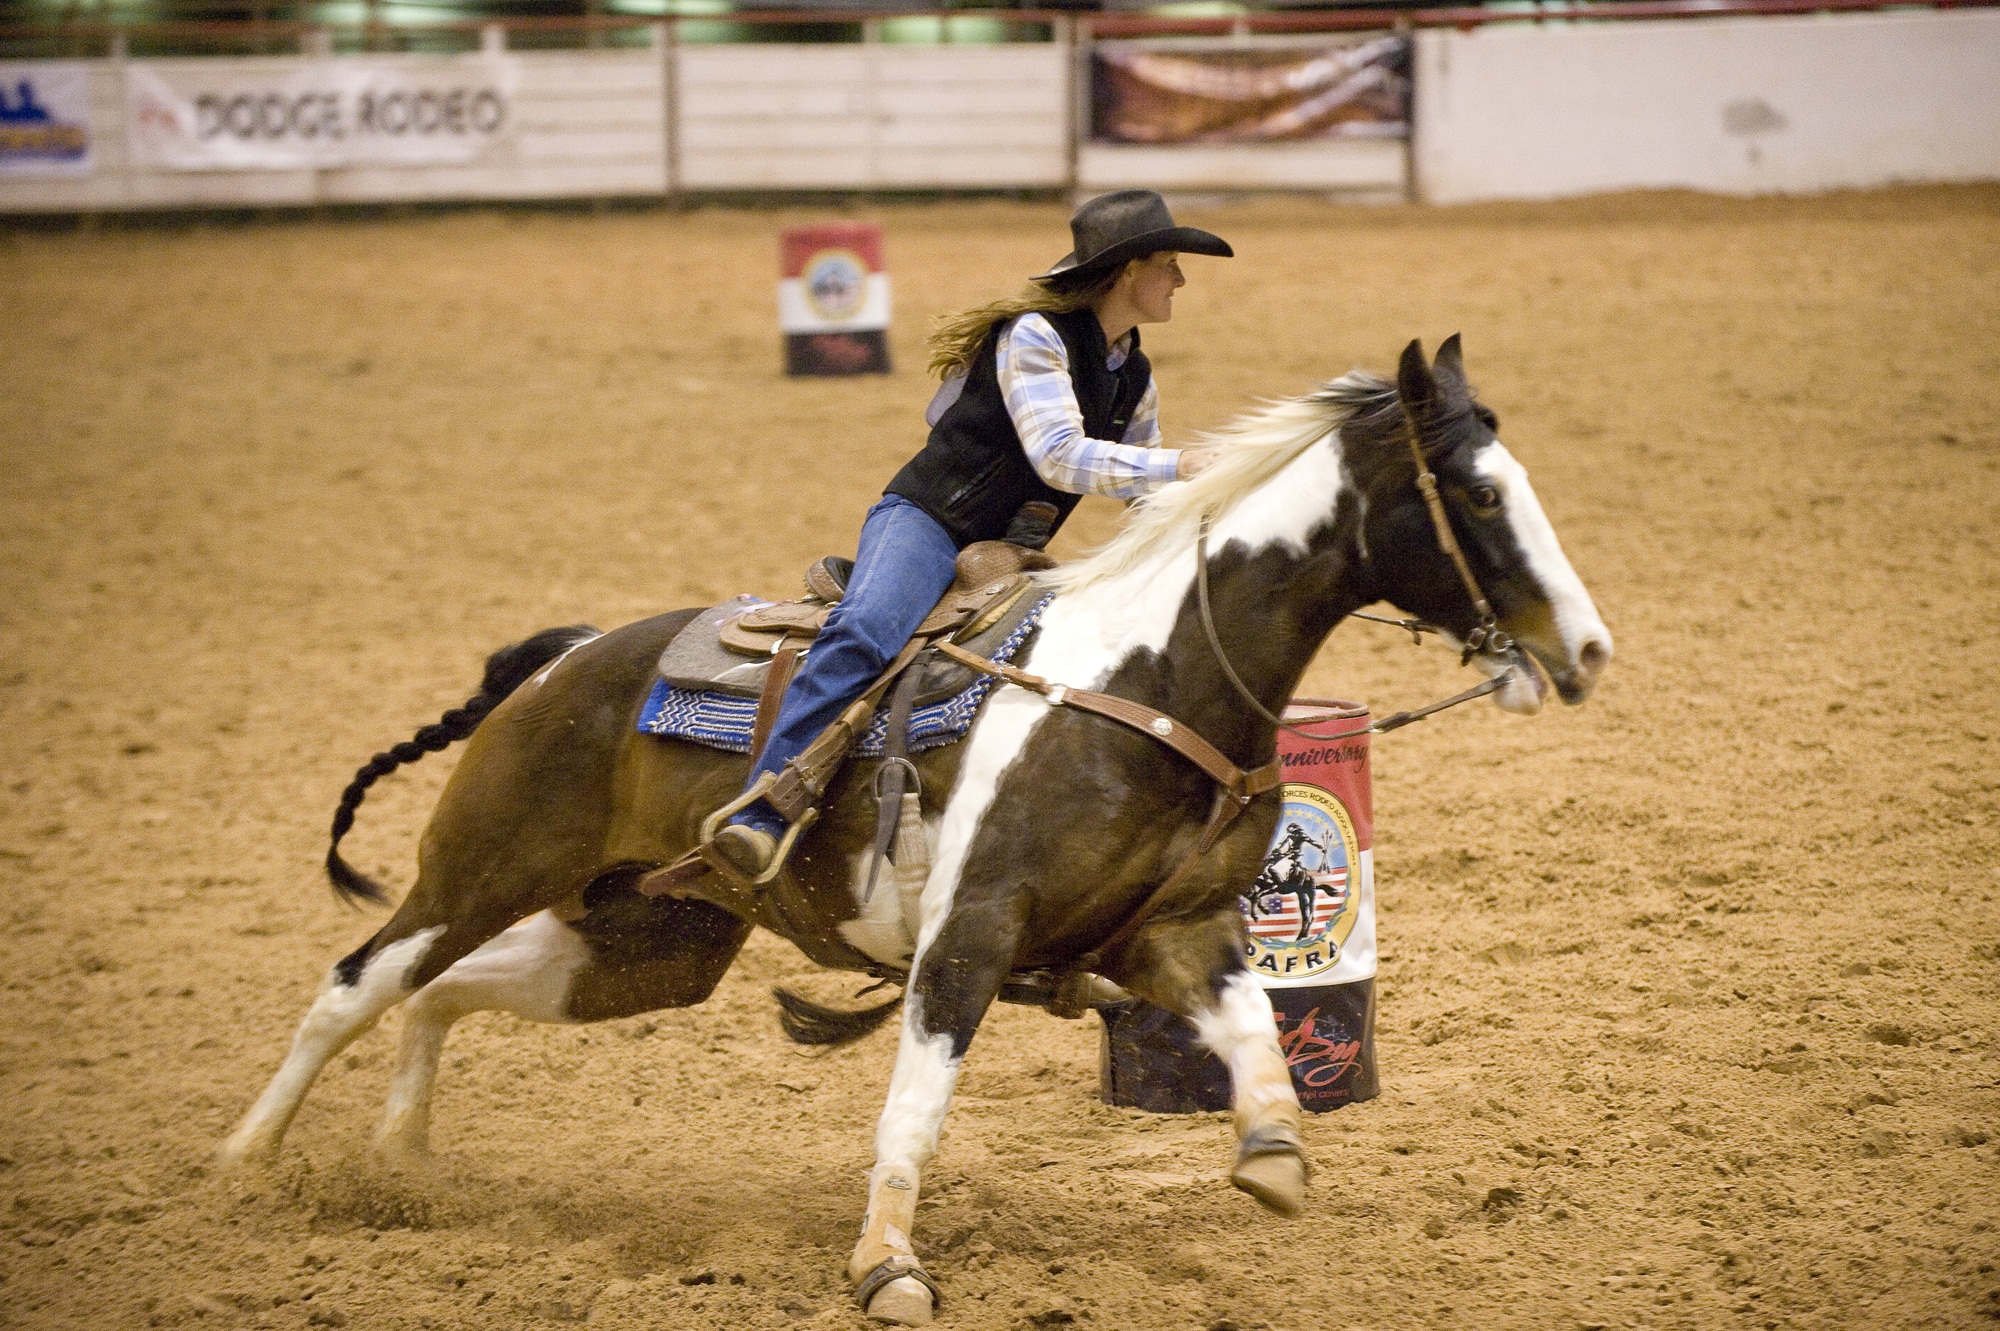 Riding in the Ring, Activity, Horse, Human, Ride, HQ Photo